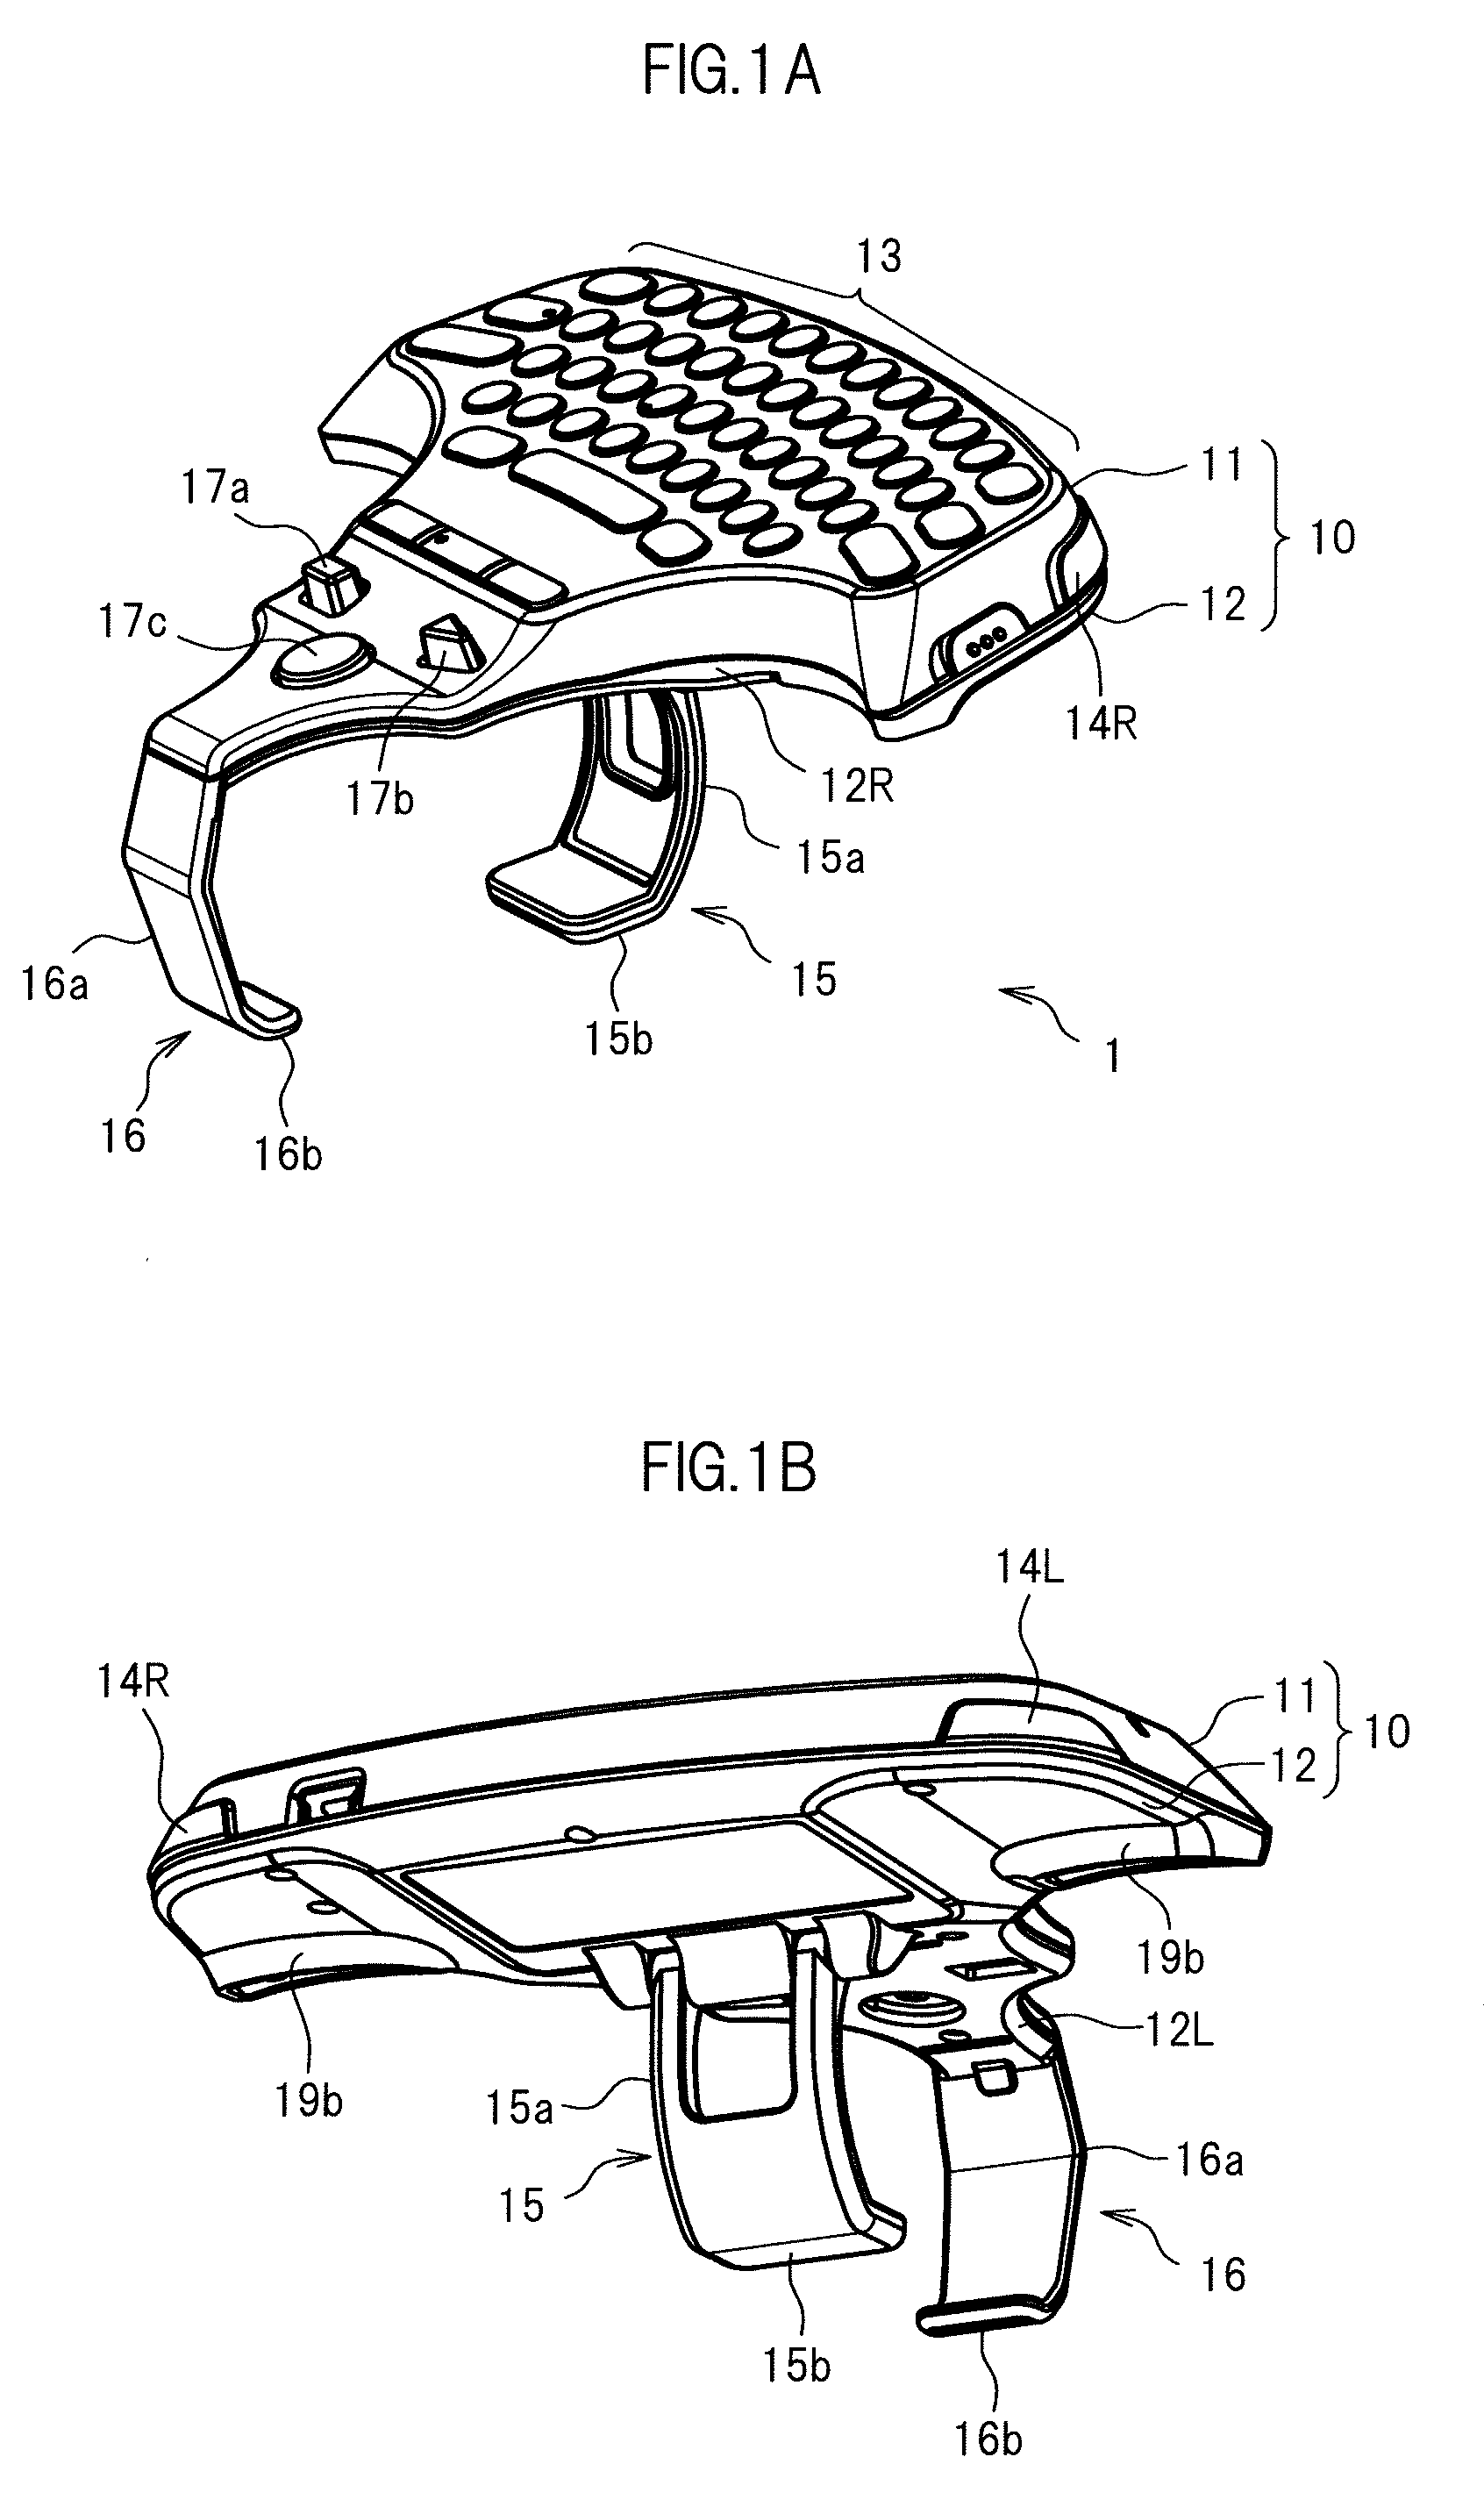 Operation input device and character input device